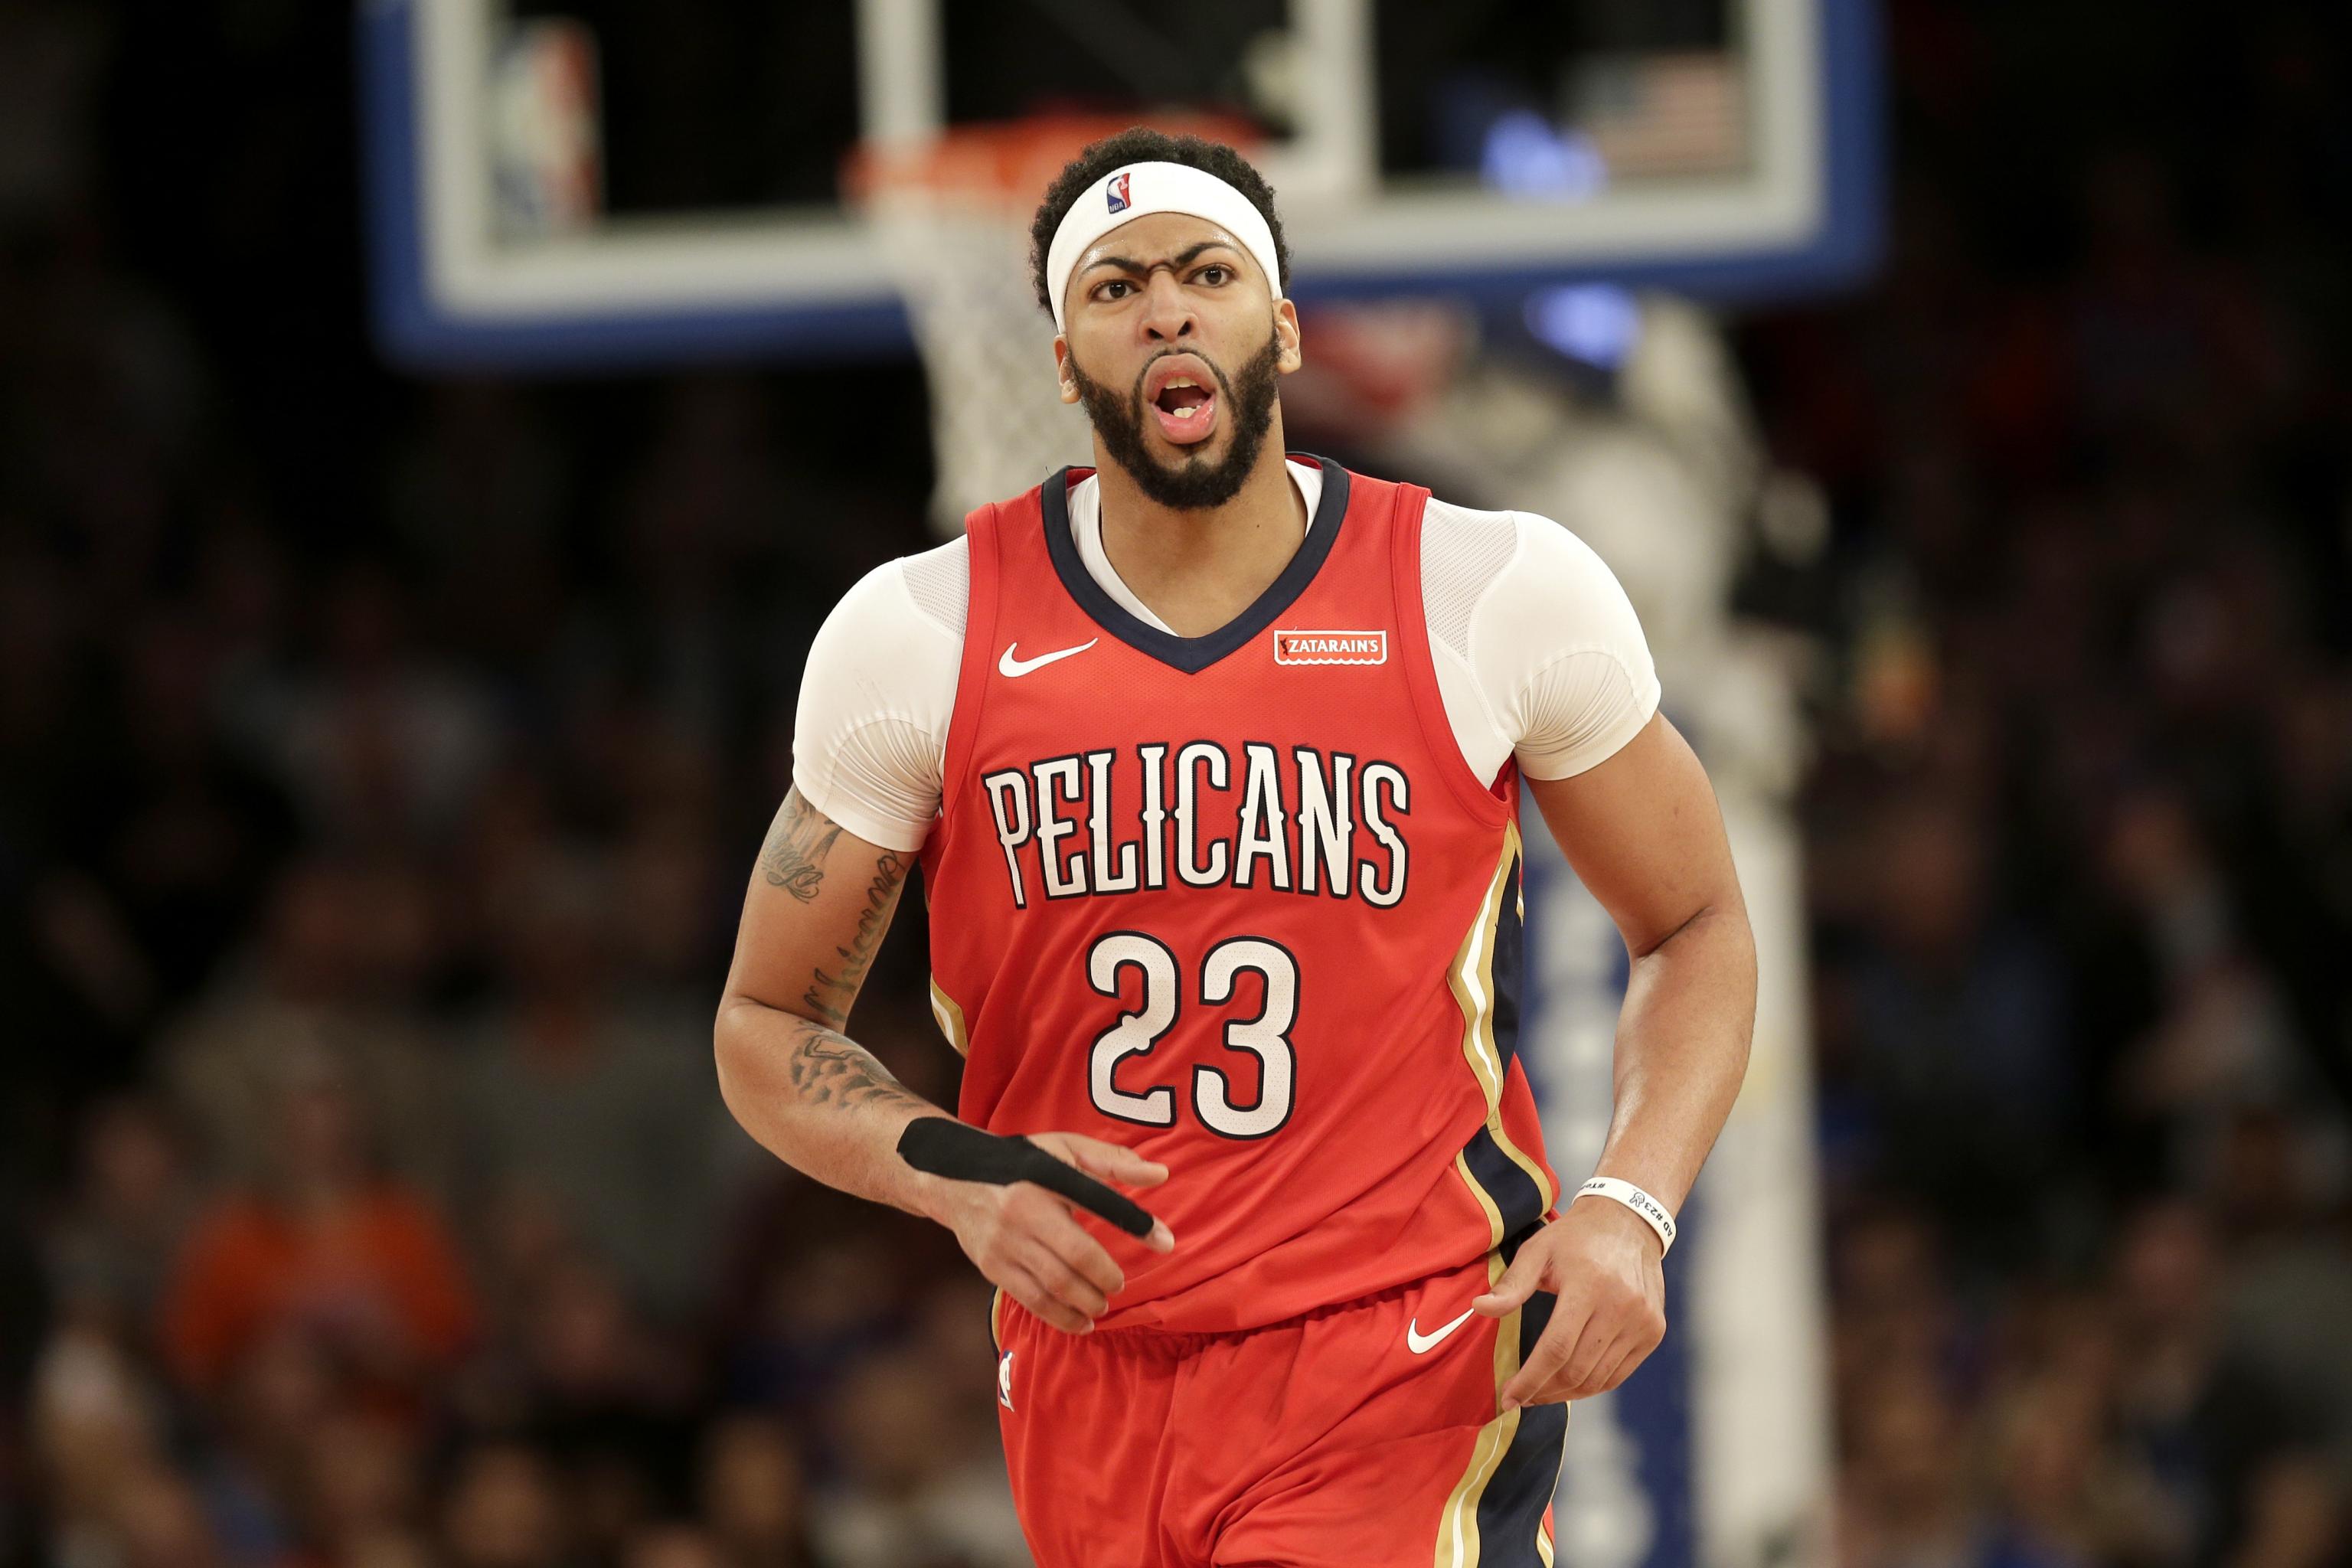 Reports: Anthony Davis declines max extension offer from Lakers